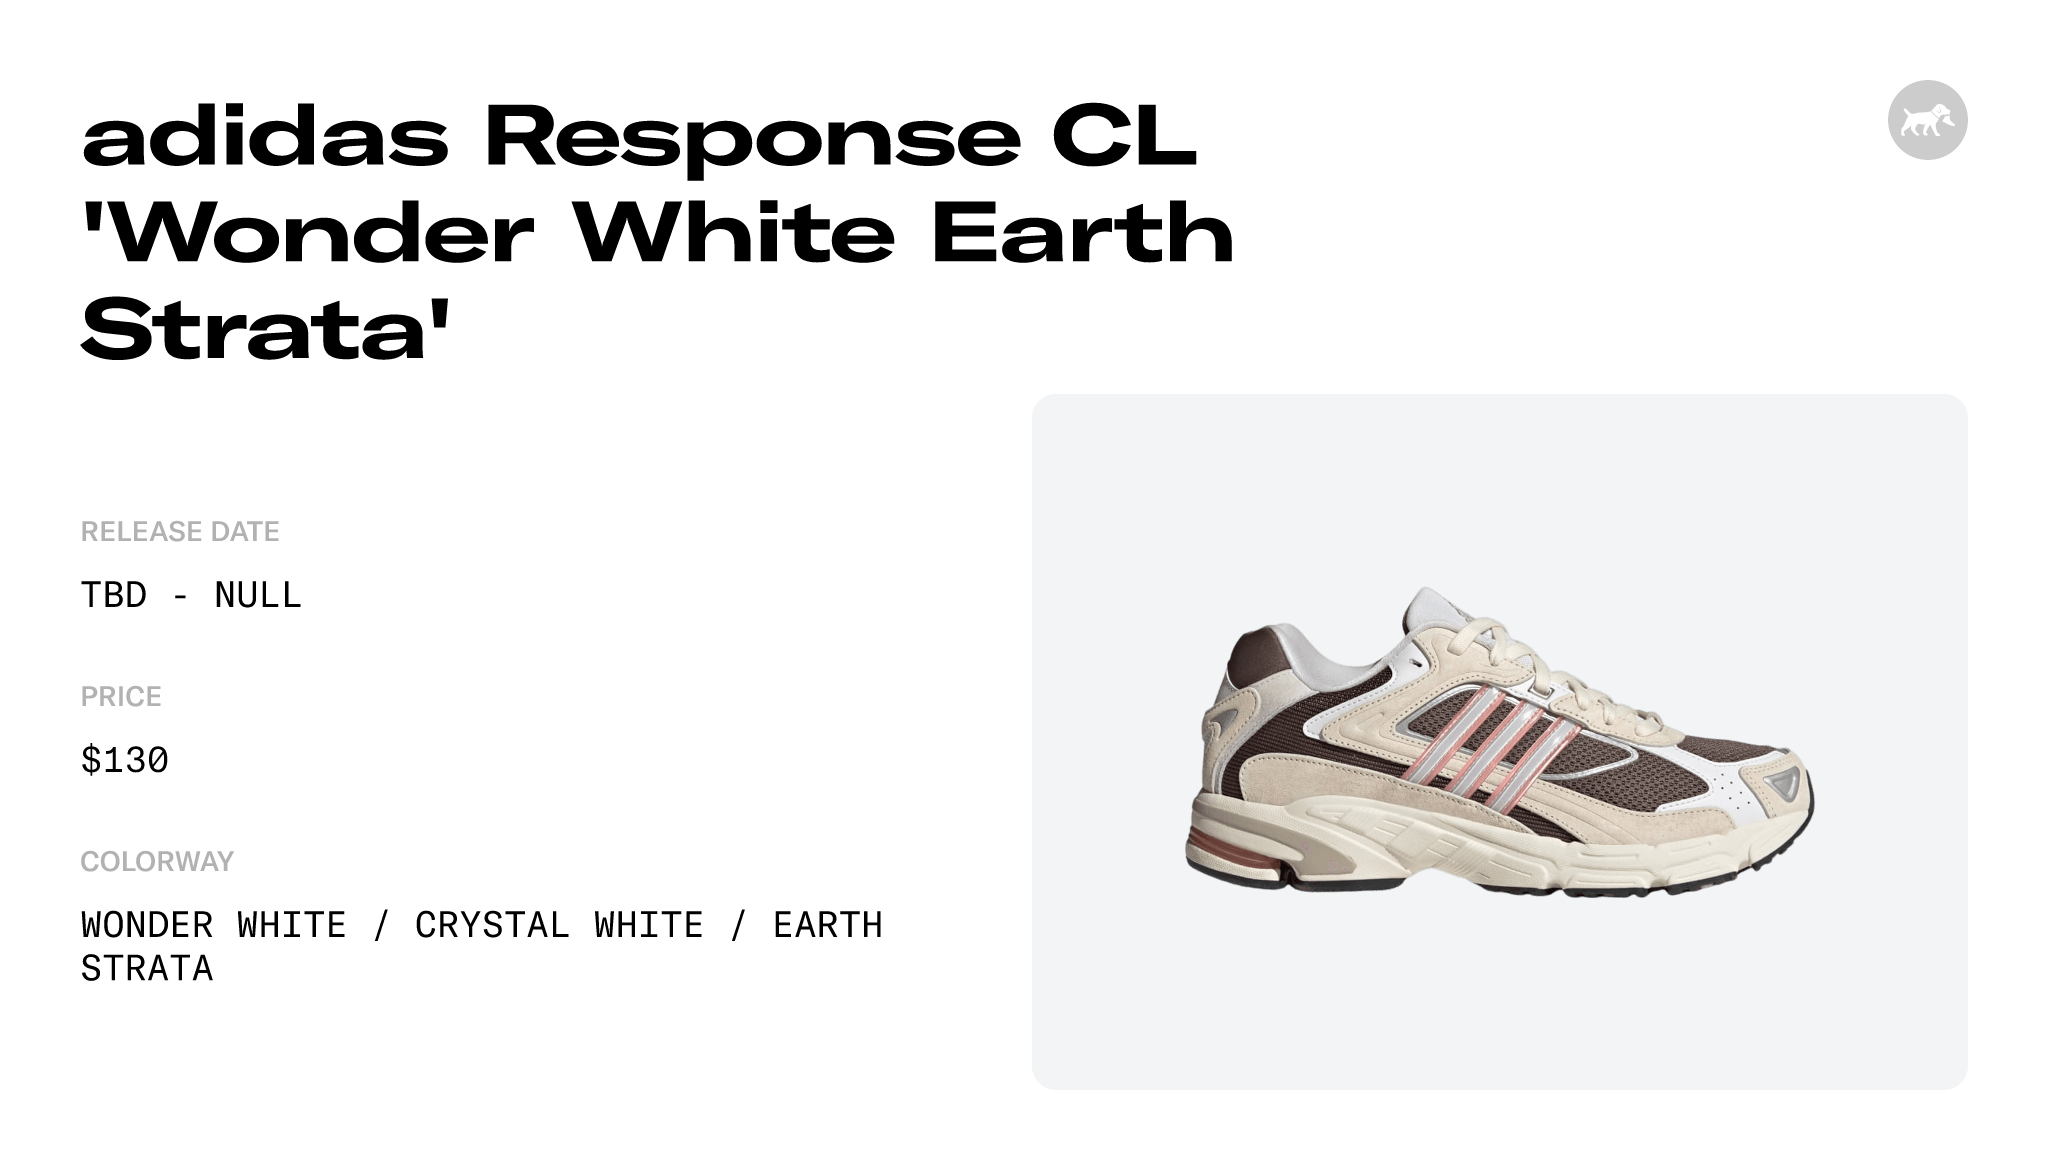 adidas Response IG3079 CL Earth White Strata\' Raffles Release \'Wonder - and Date